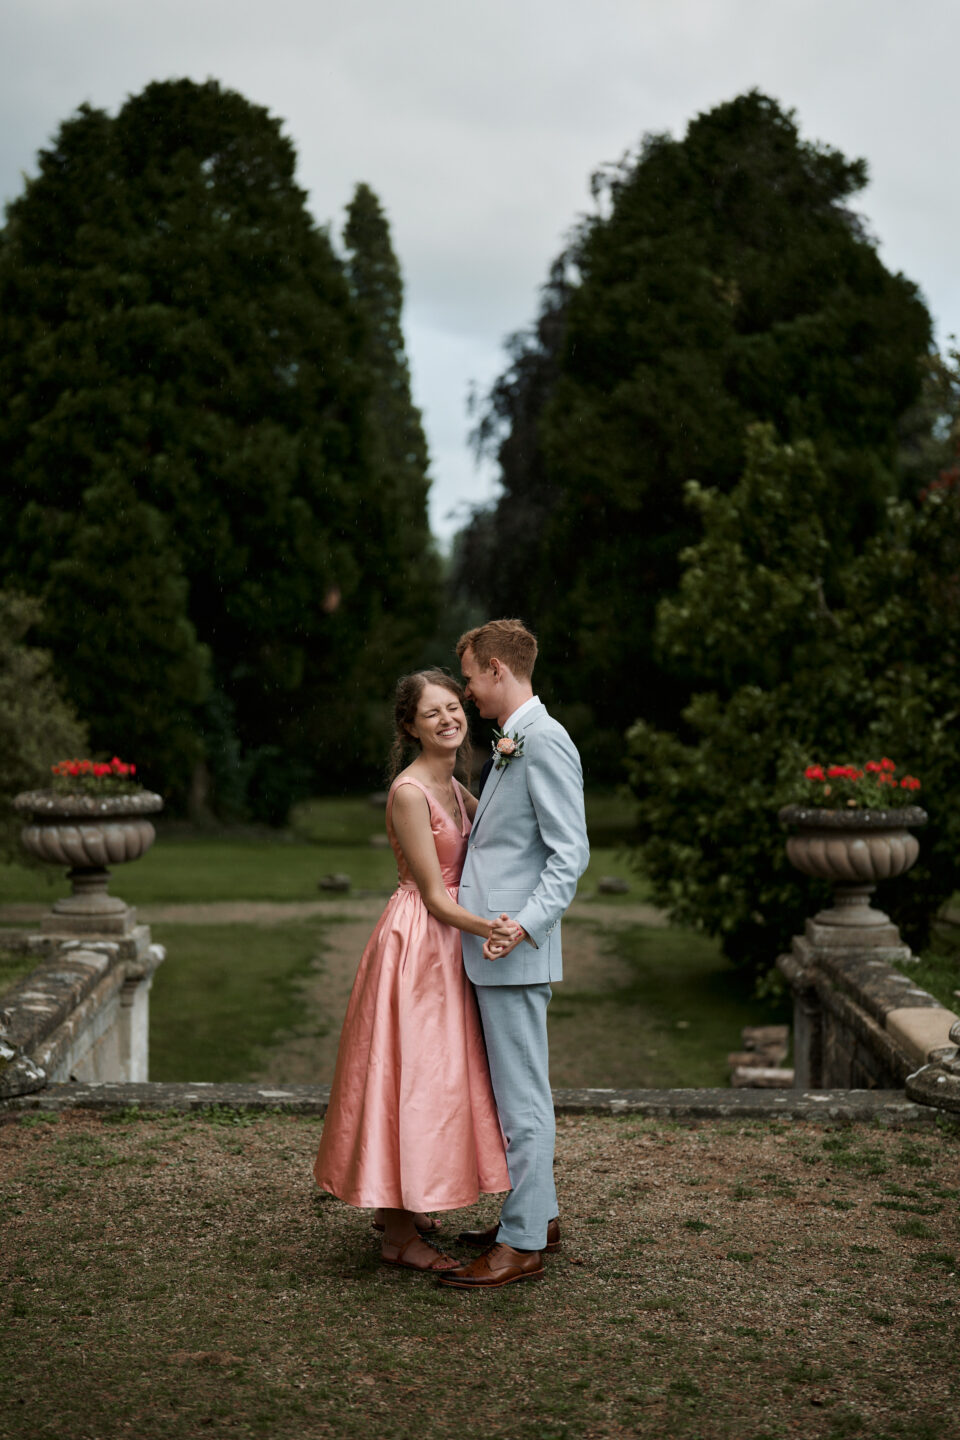 A man and woman, dressed for their wedding with the woman in a pink dress, are standing in a garden.